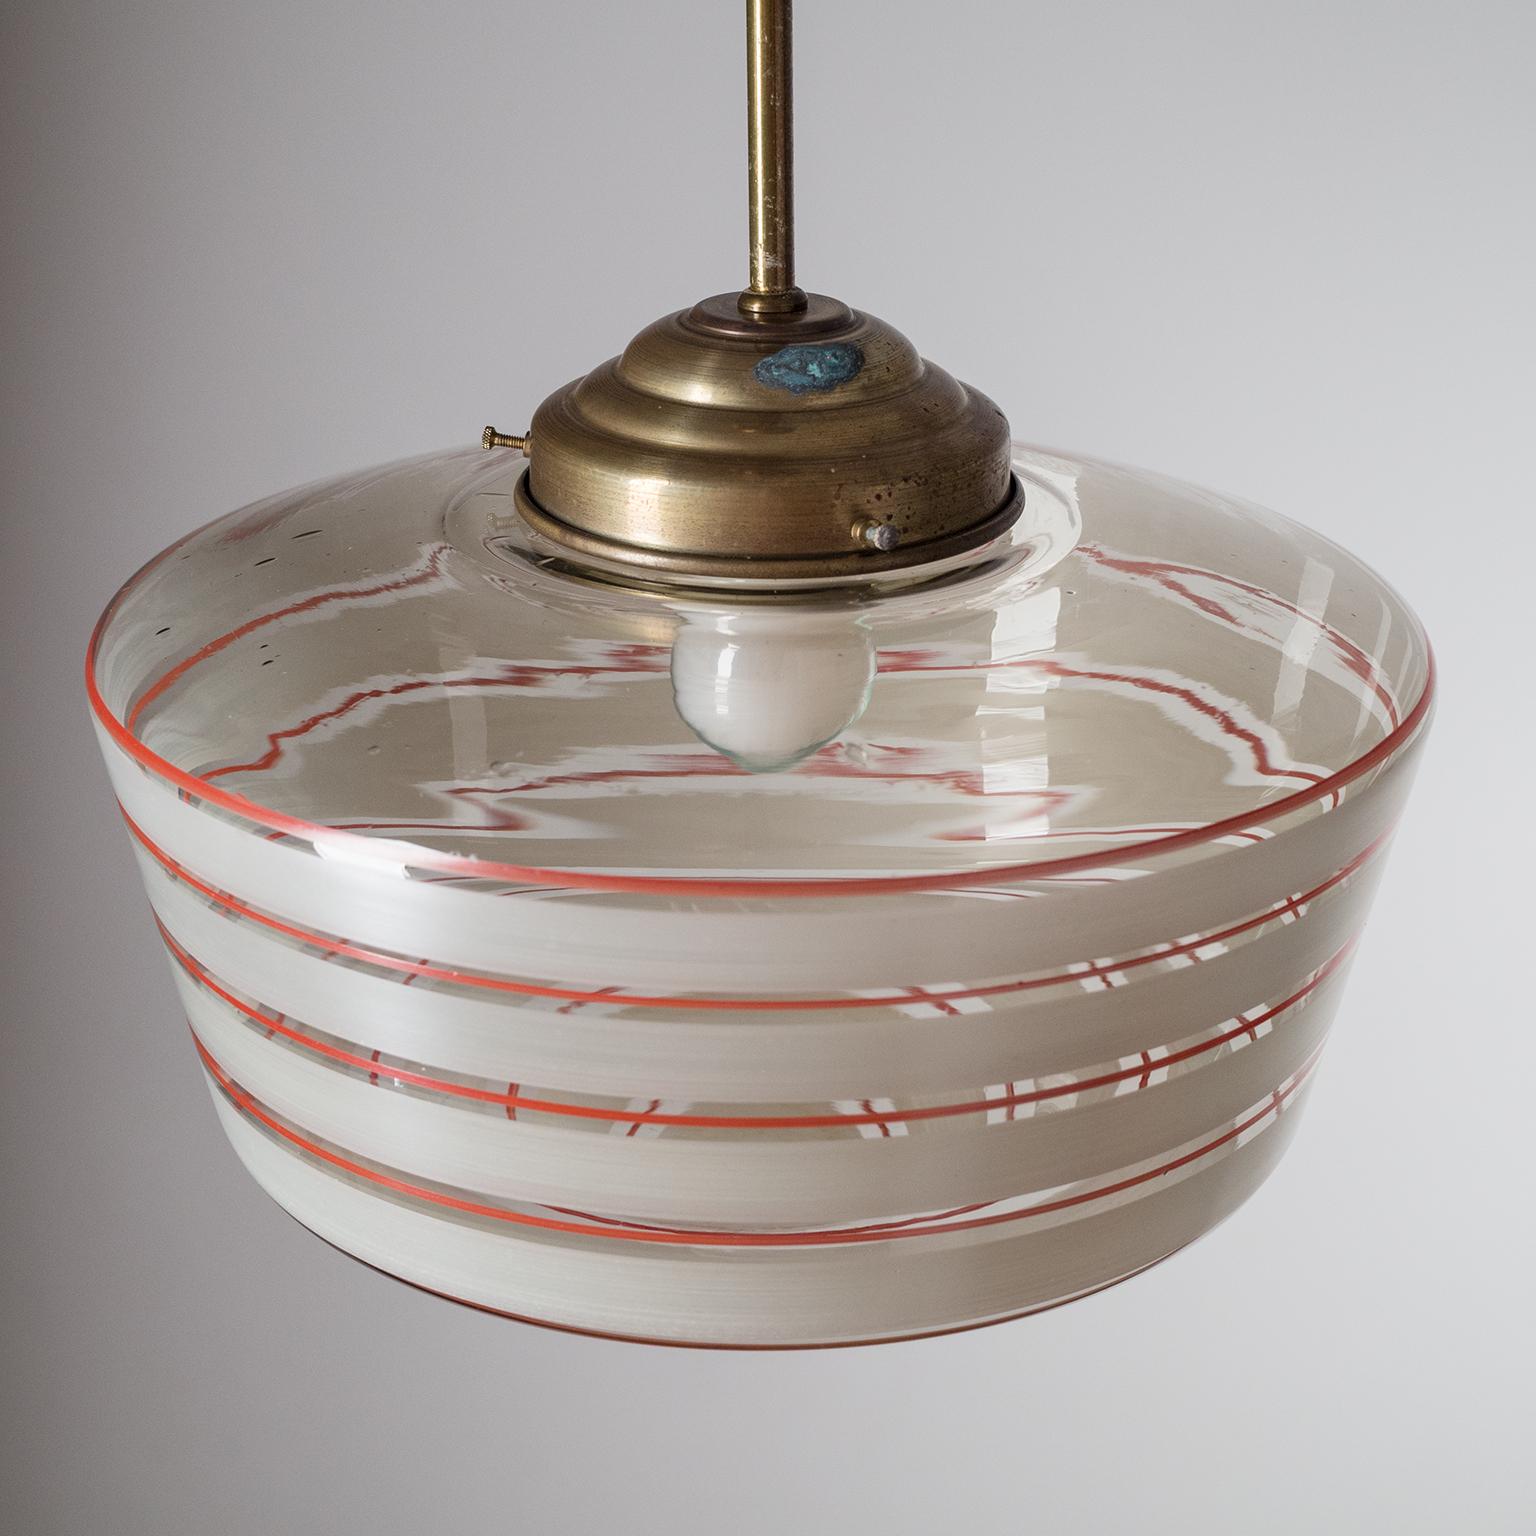 Mid-20th Century Art Deco Ceiling Light, circa 1930, Hand-Painted Glass and Brass